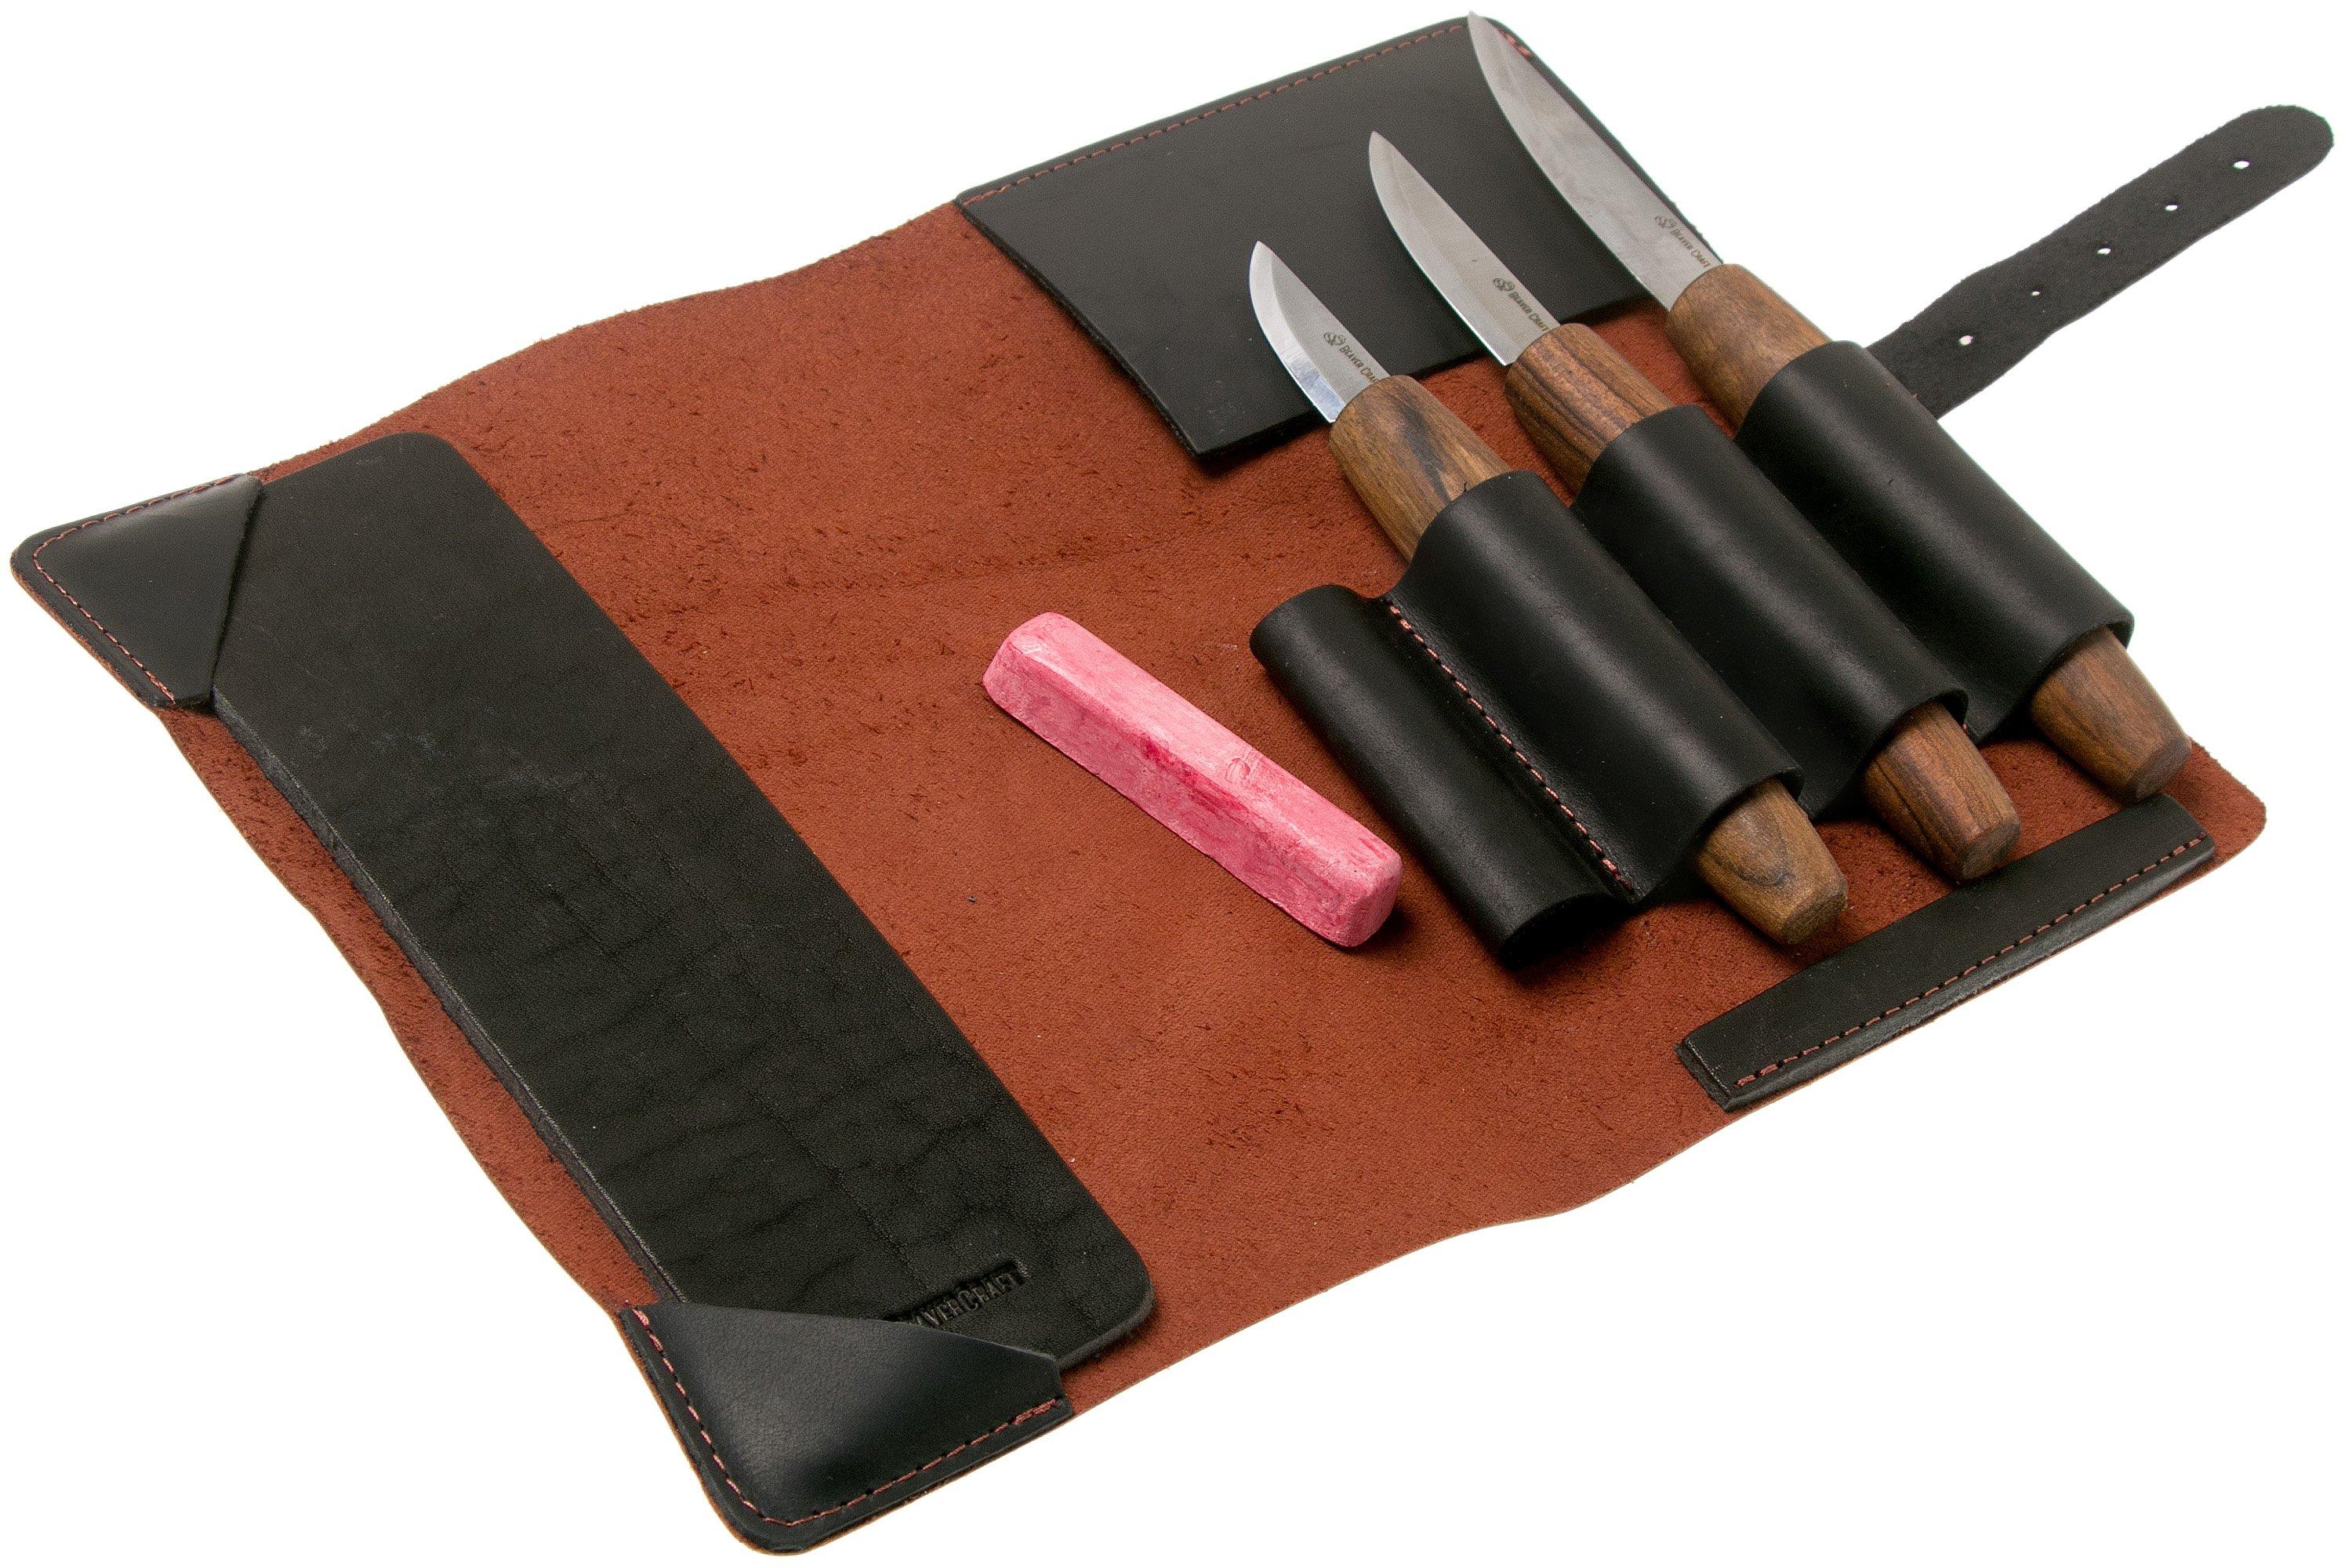 BeaverCraft Deluxe Wood Carving Tools Kit S19x - Wood Carving Knife Whittling Kit Wood Carving Whittling Knife Set with Leather Strop and Polishing